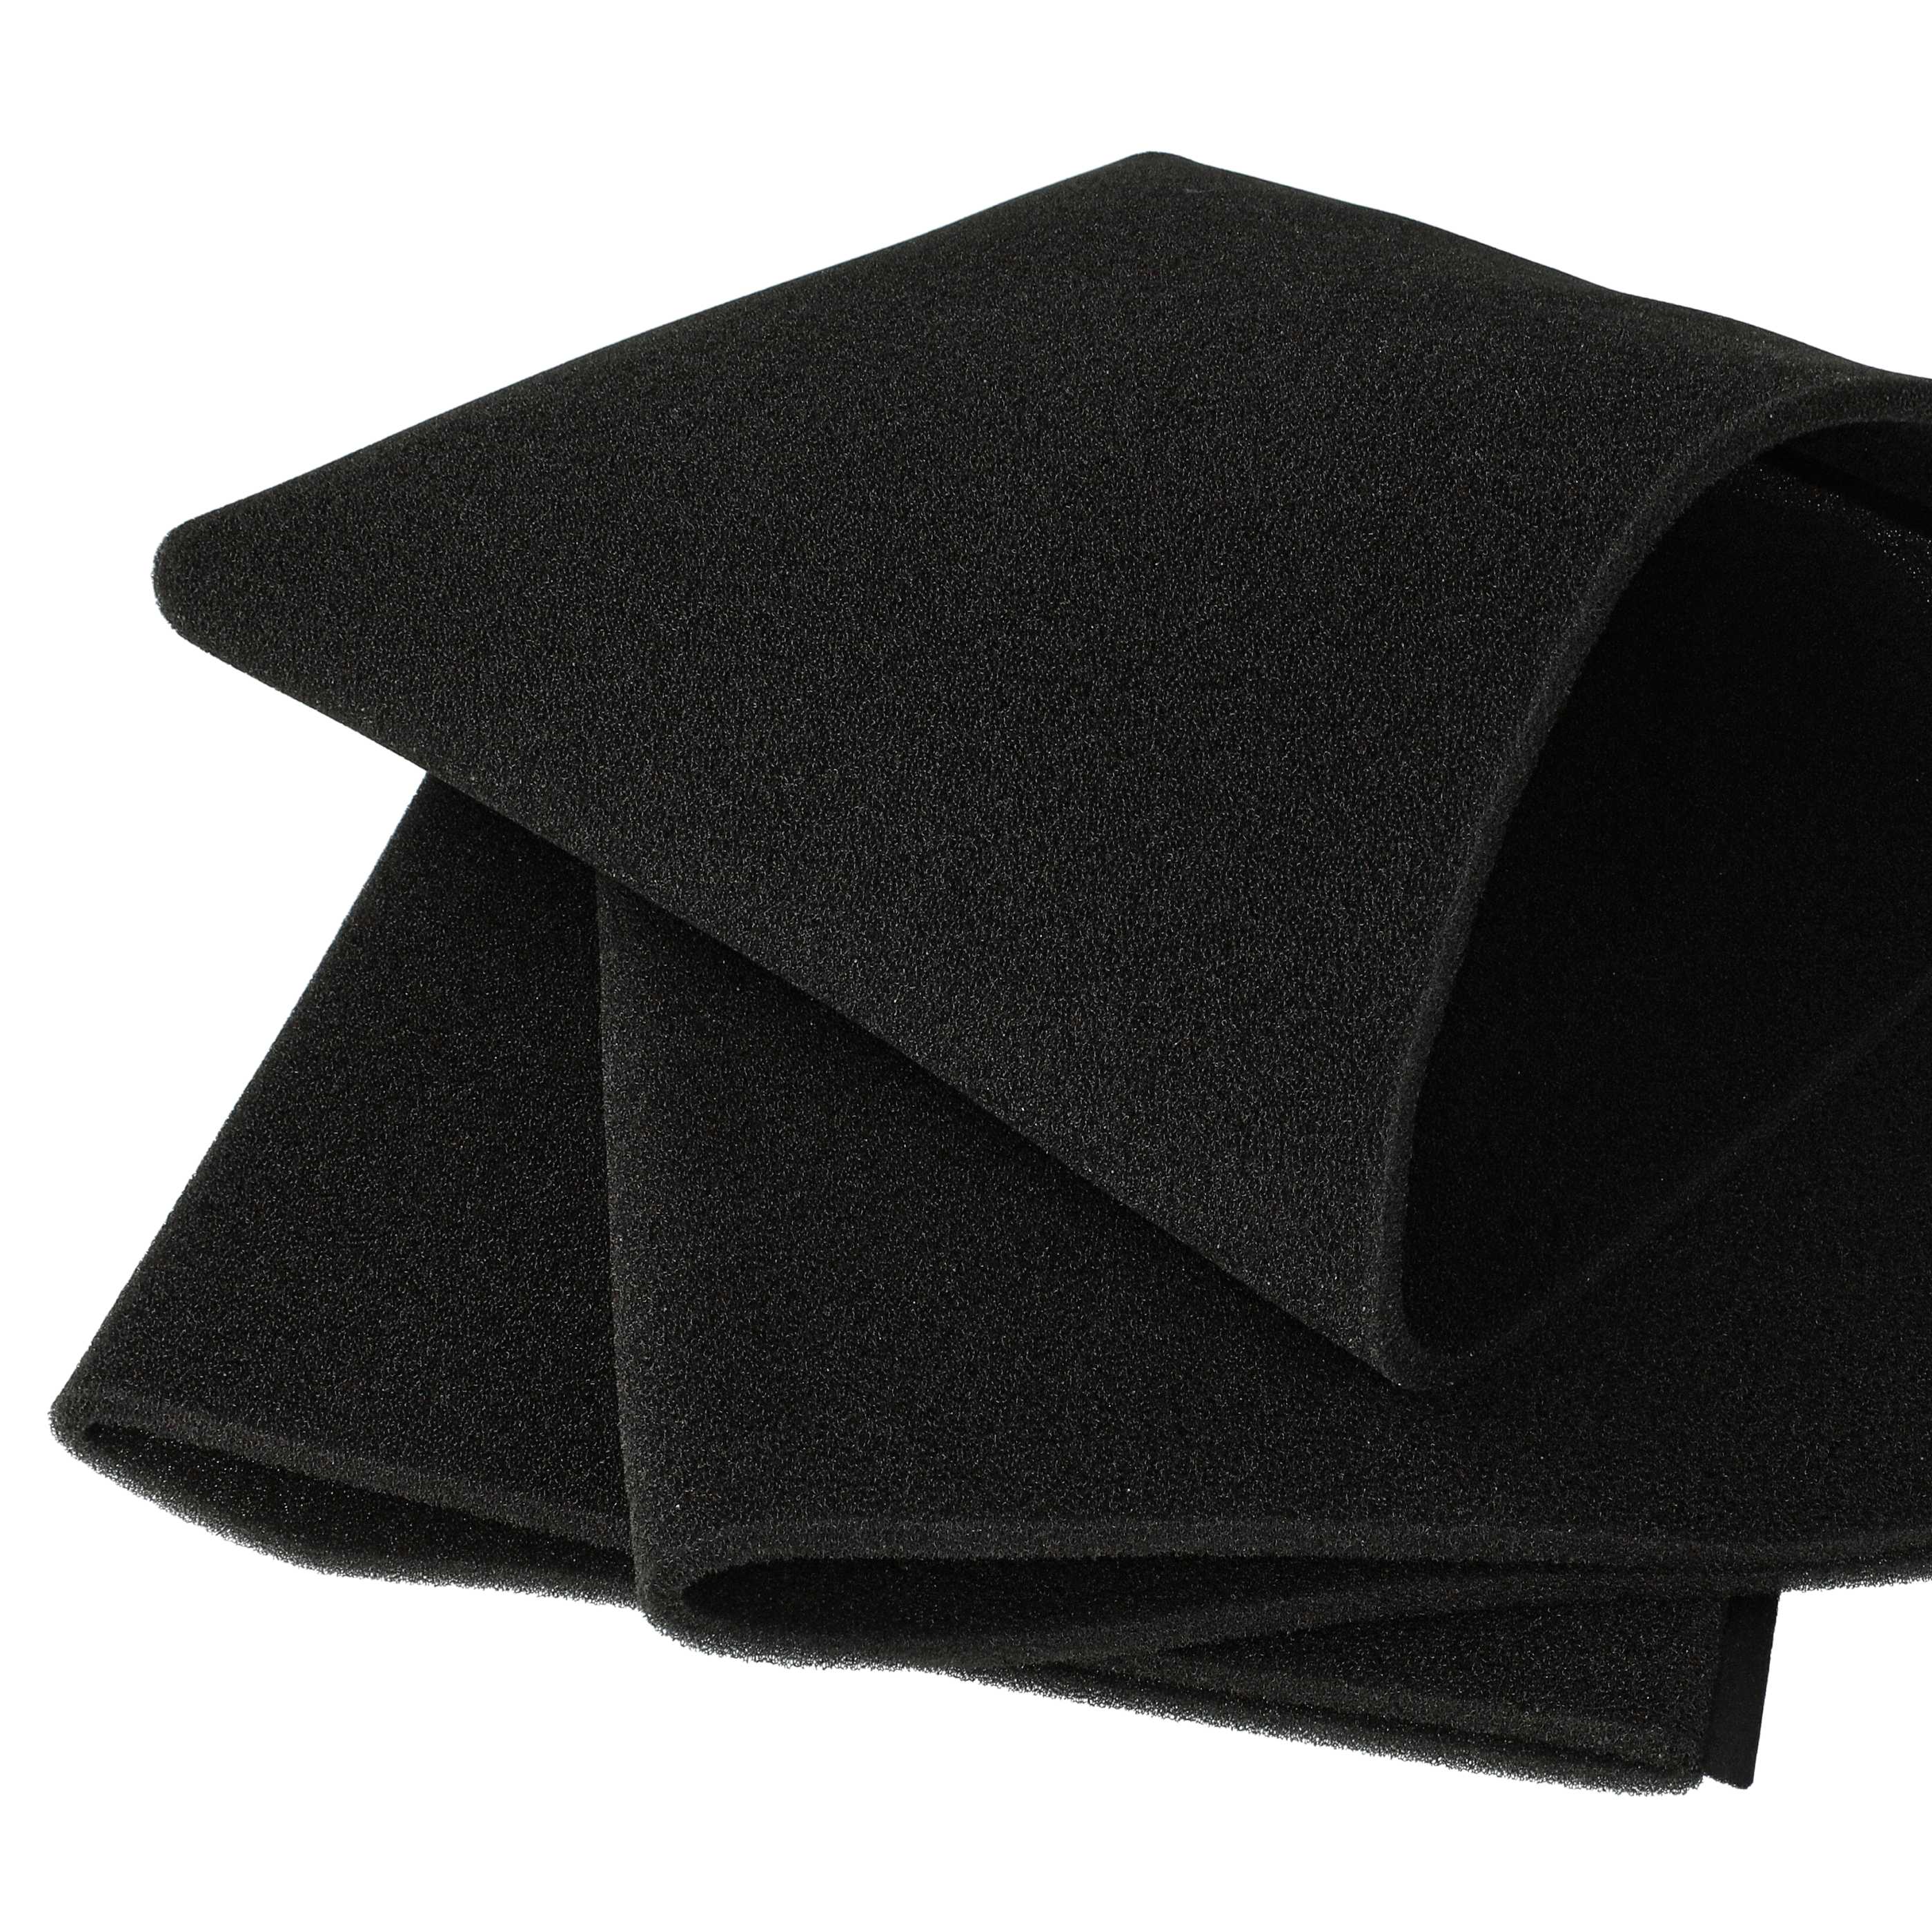 3x foam filter replaces Parkside 30250100 for Parkside Vacuum Cleaner